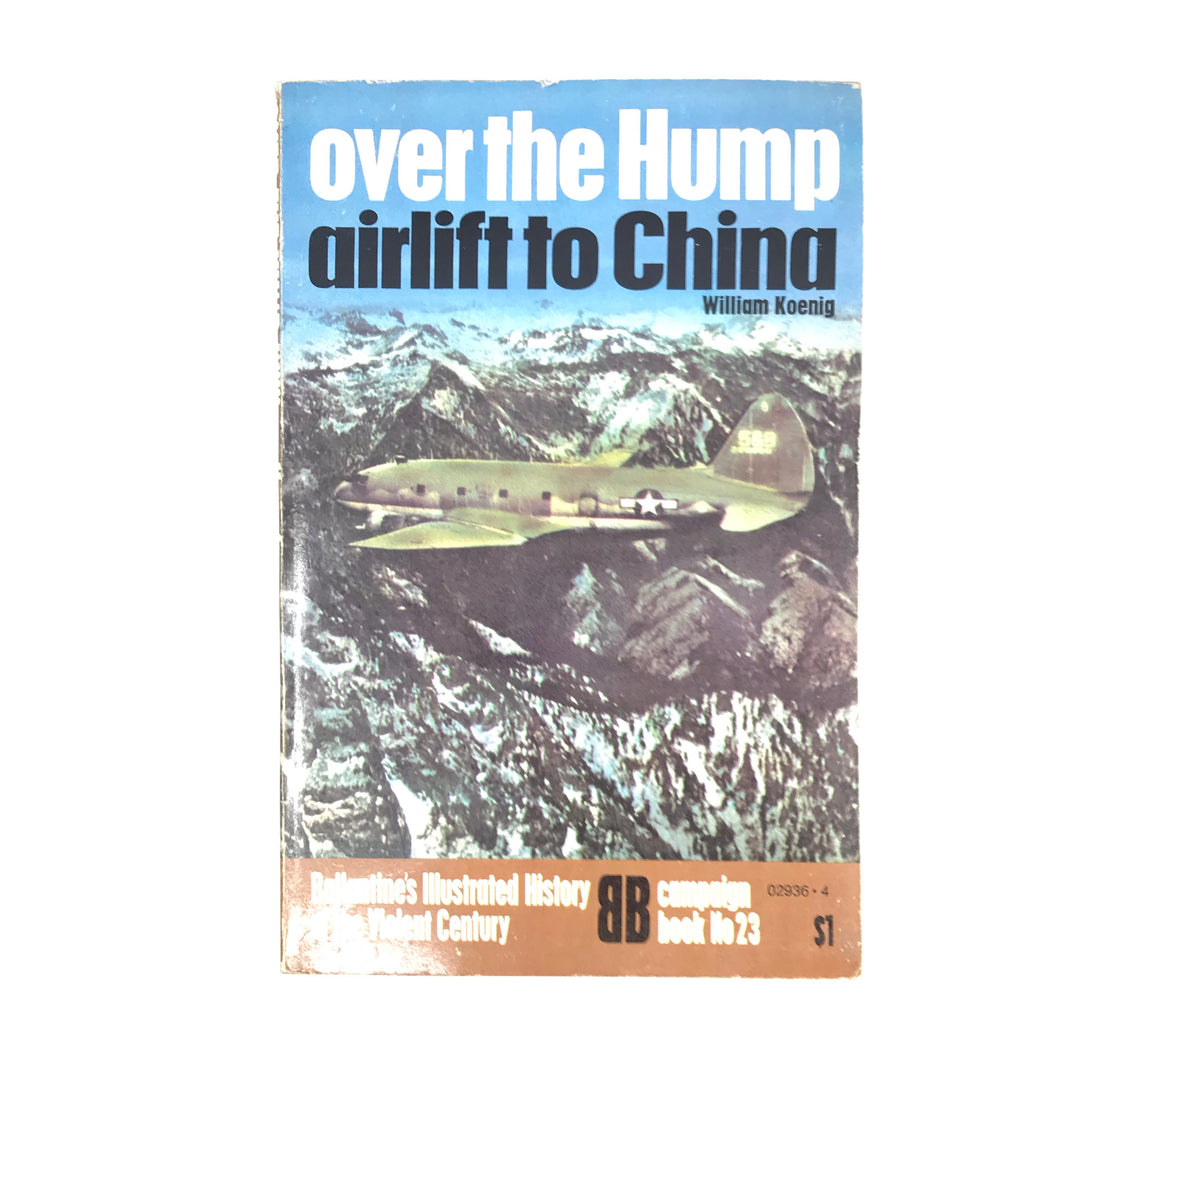 Ballantine&#39;s Illustrated History of the Violent Century: Campaign Book No23 Over the Hump Airlift to China (William Koenig)